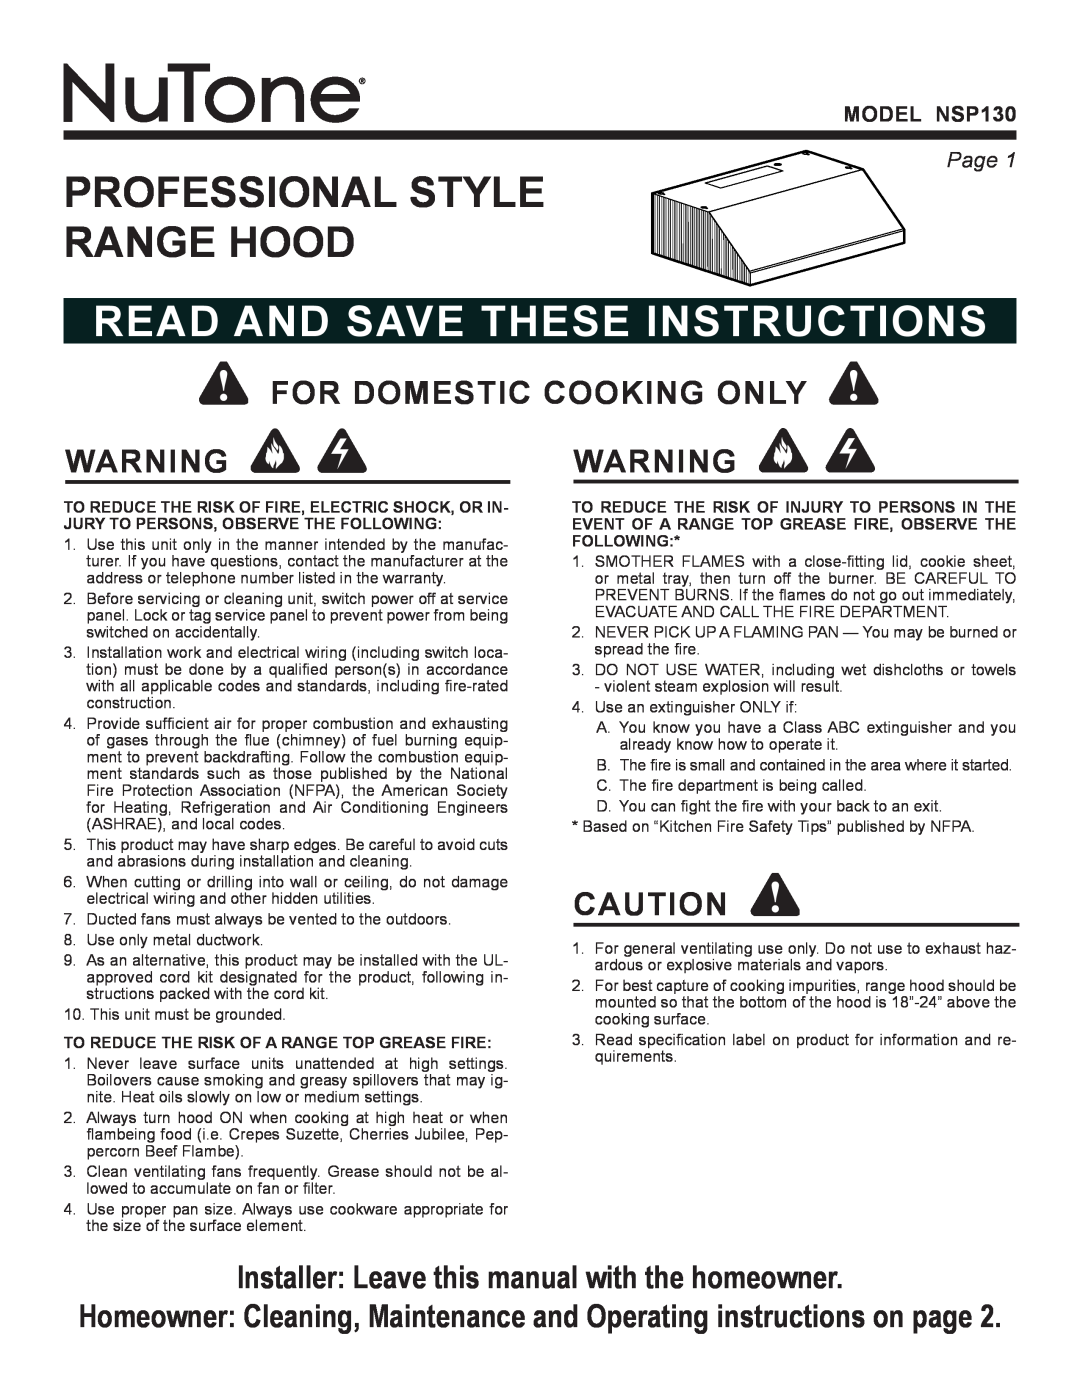 NuTone NSP130 warranty Professional Style Range Hood, read and save these instructions, for domestic cooking only, Page  